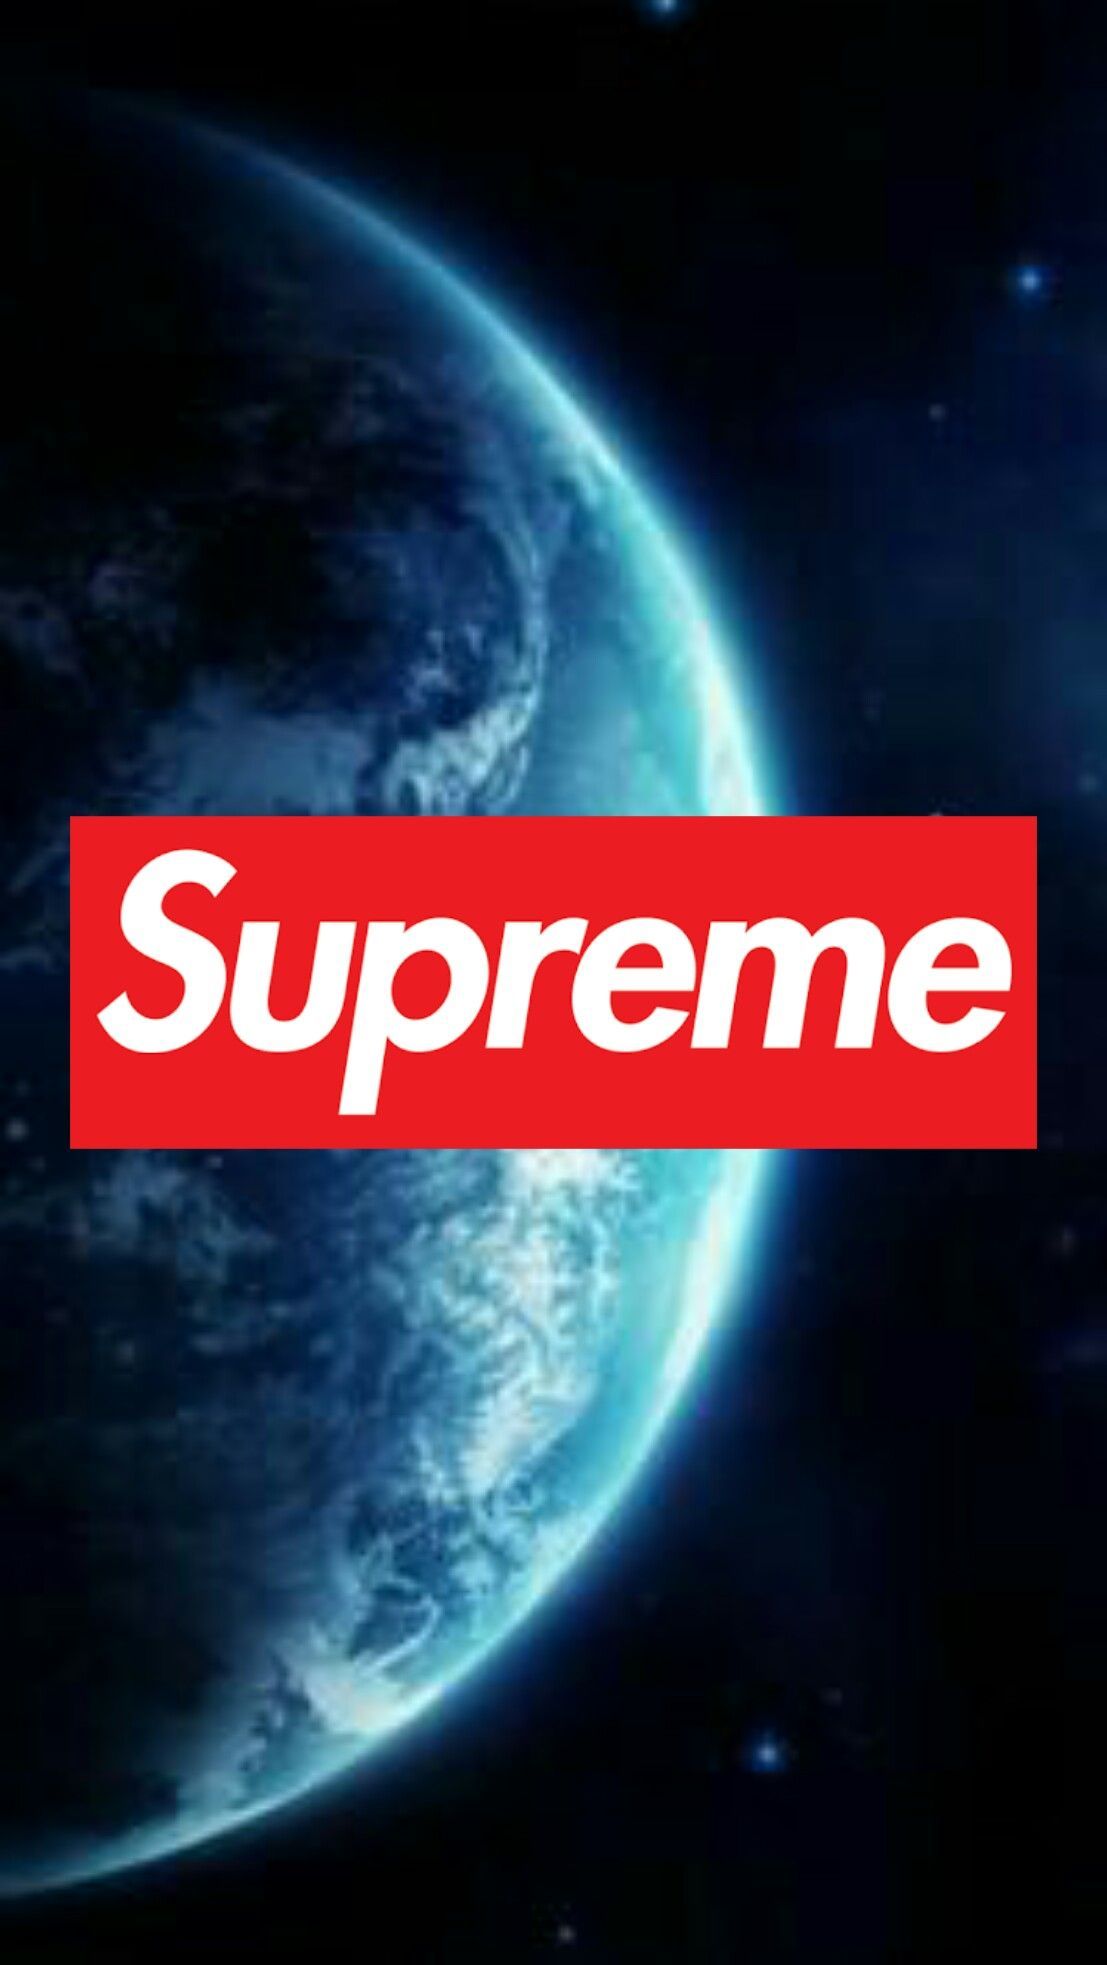 Supreme Galaxy Wallpapers - Wallpaper Cave